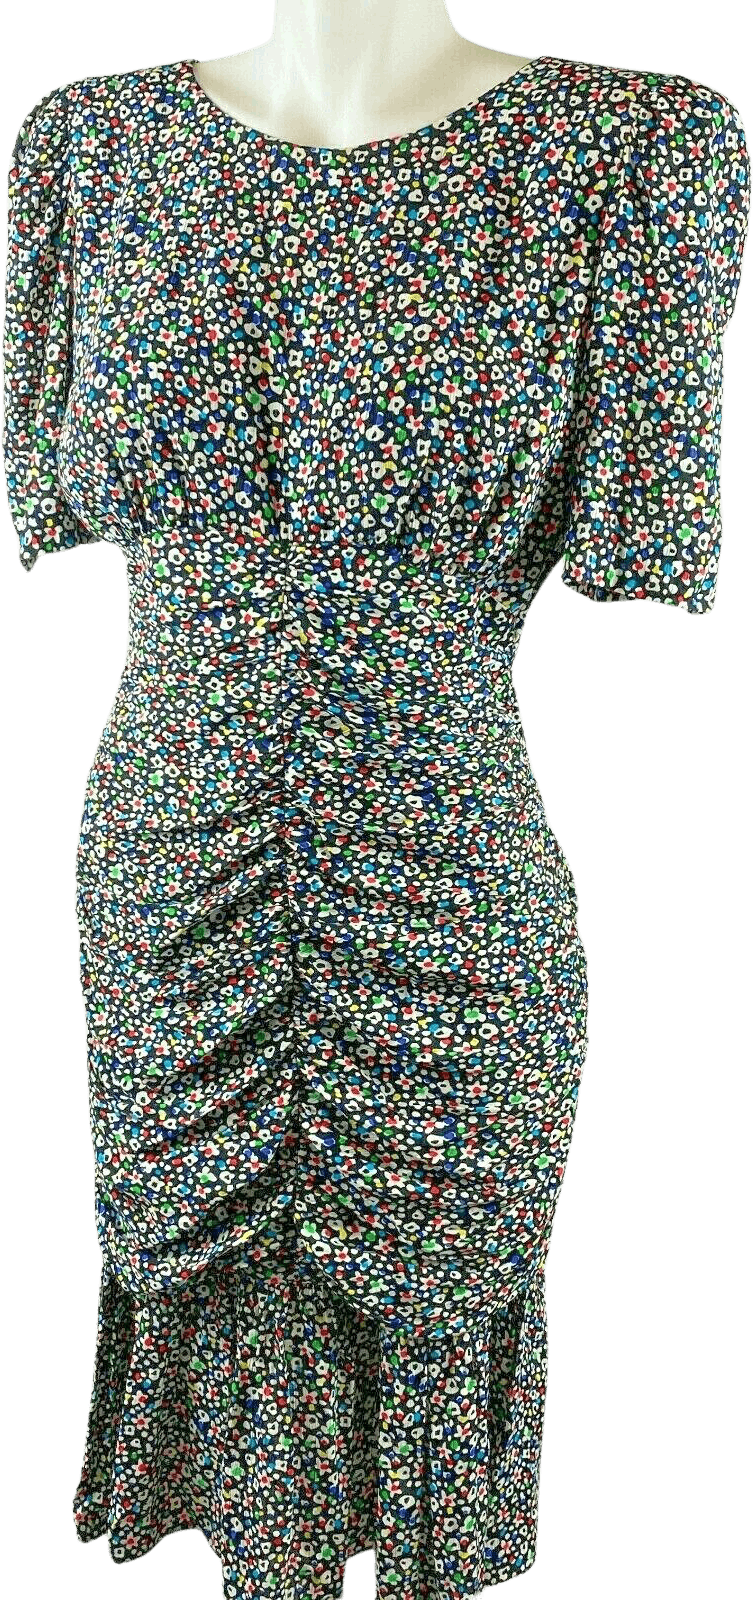 Vintage 80’s Black Colorful Dot Ruched Mini Party Dress by Datiani ...